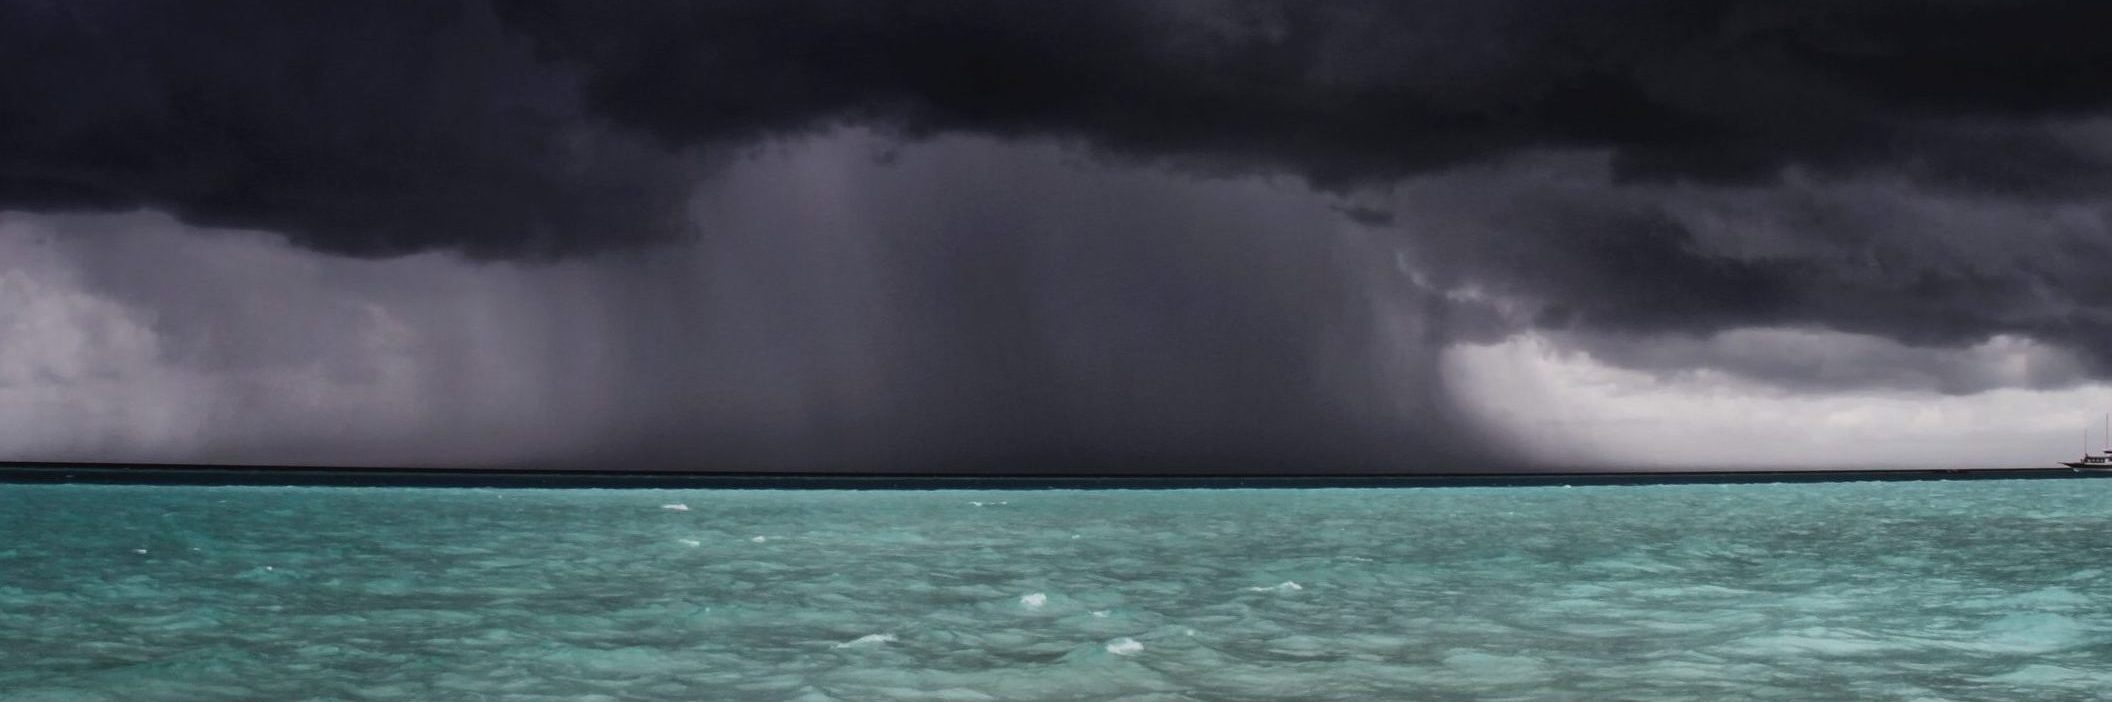 Storm approaches boat, Maldives